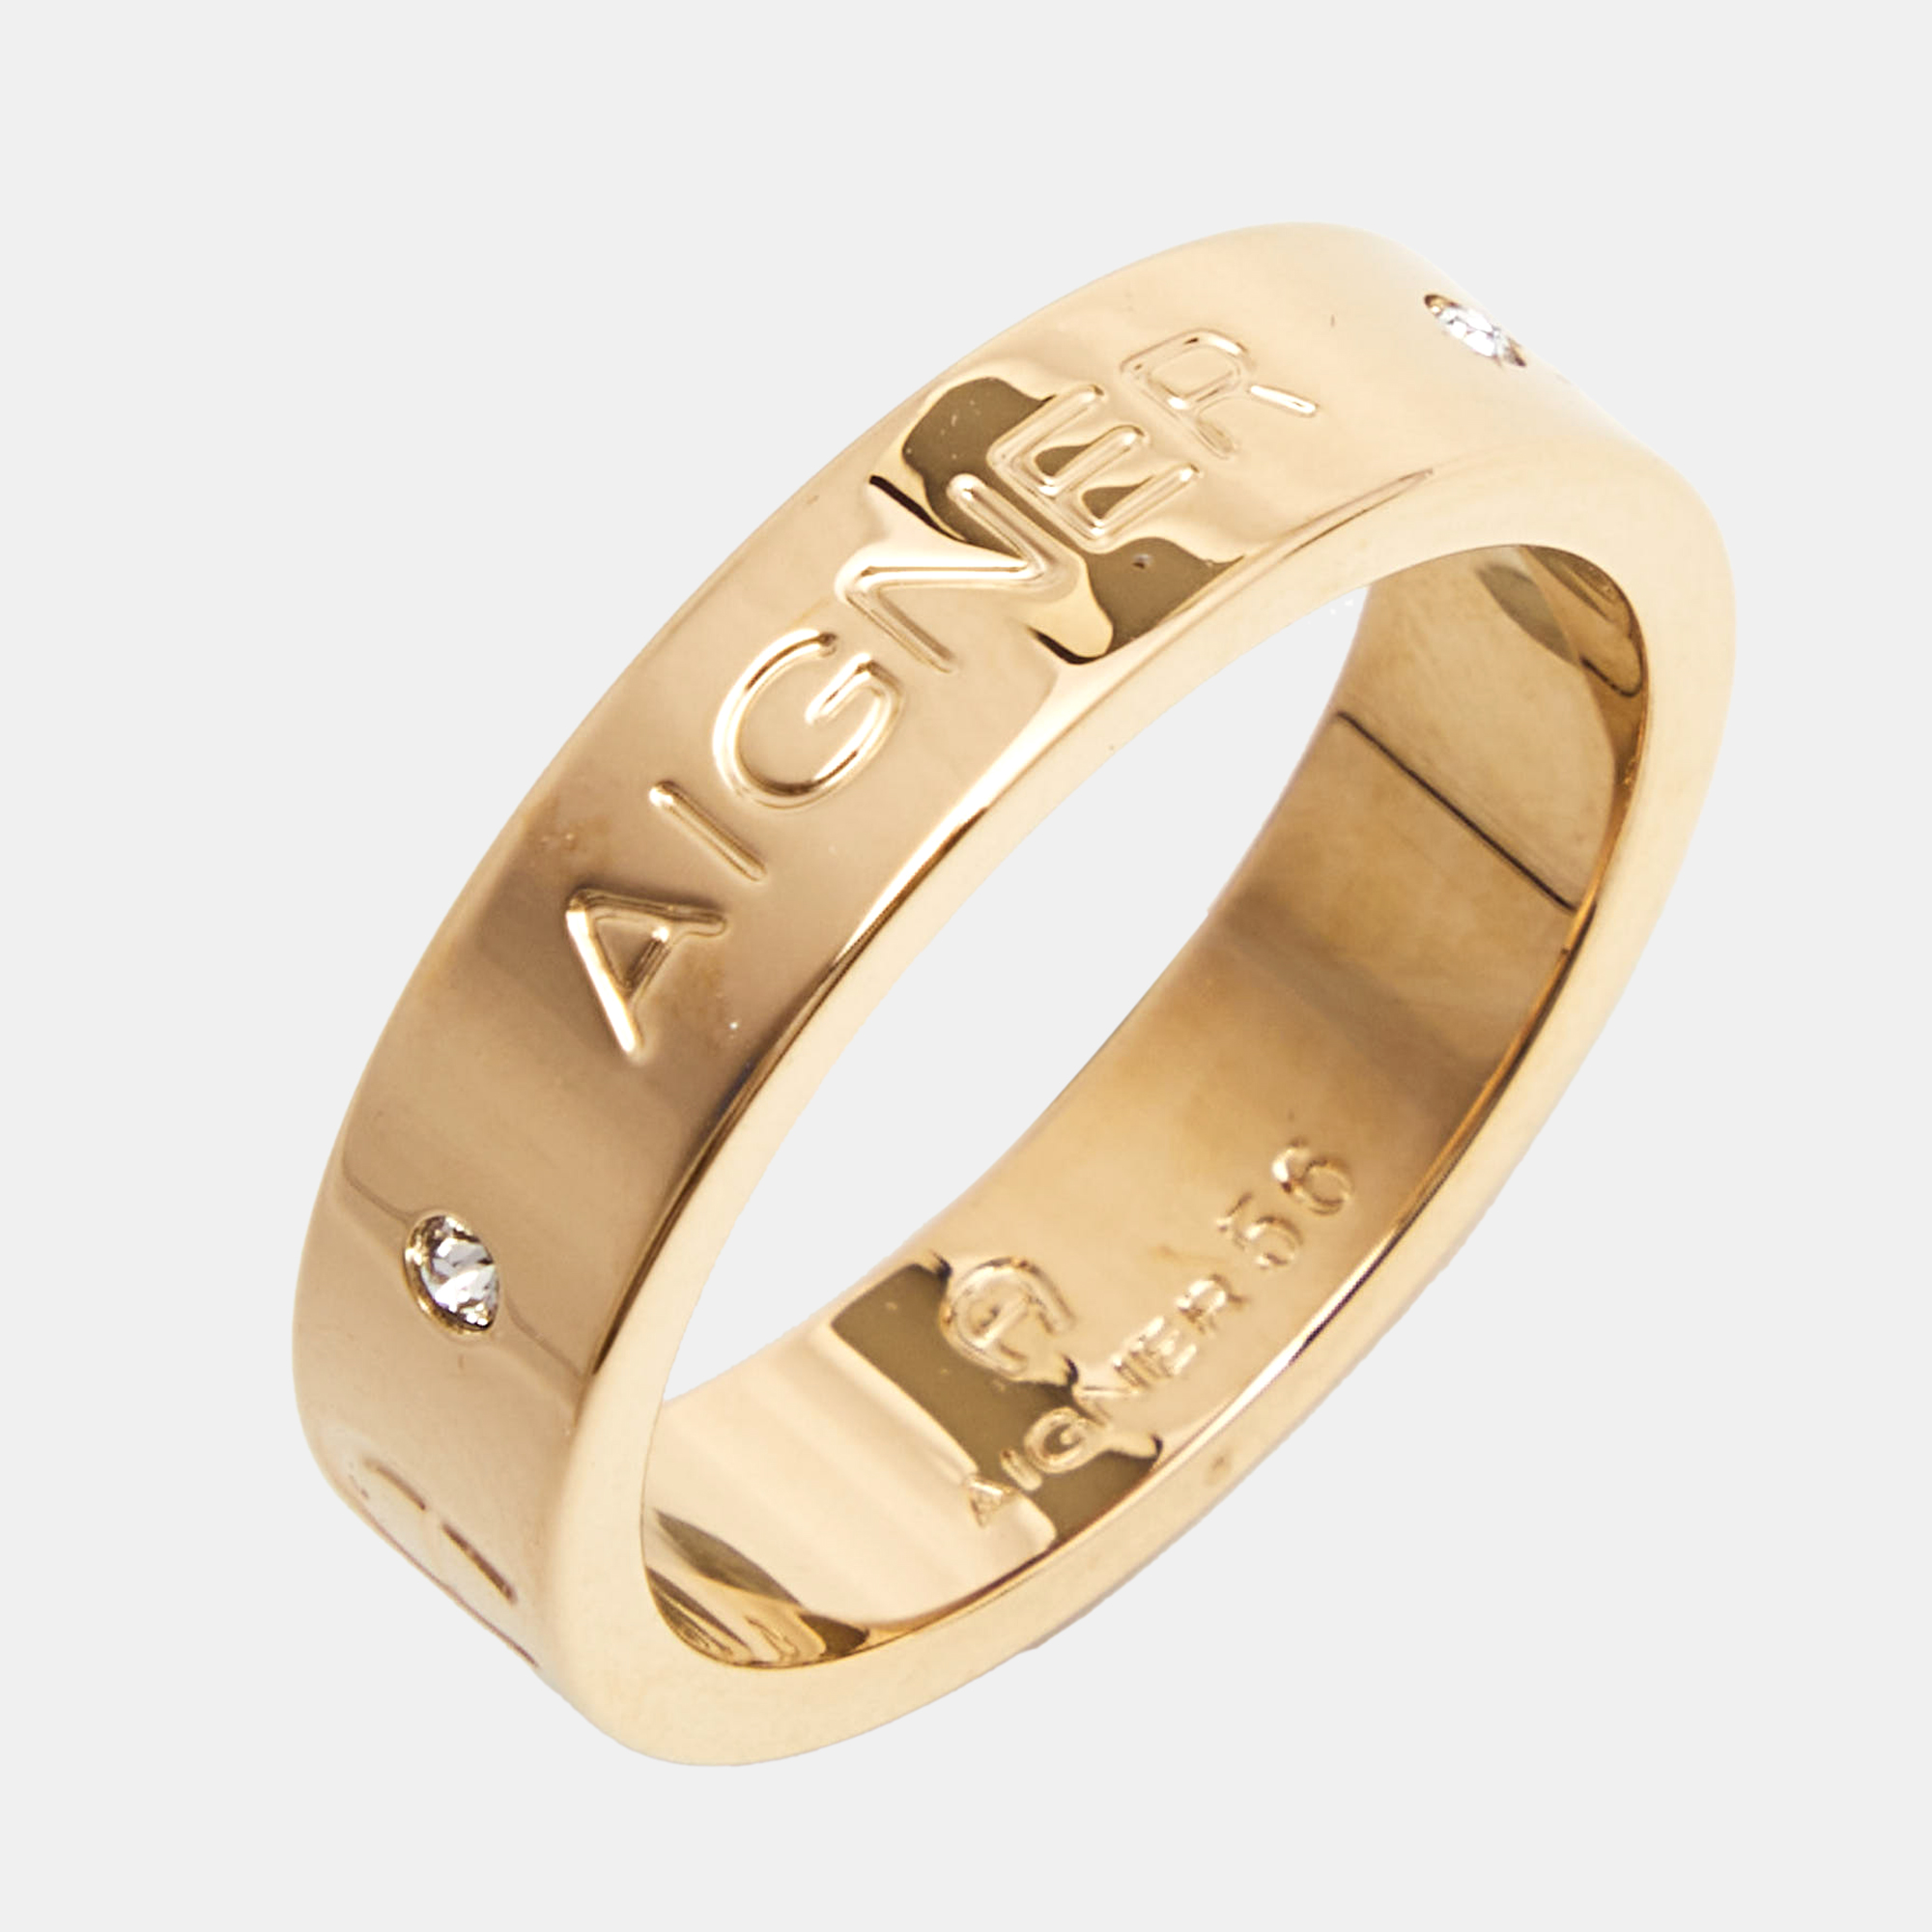 Aigner Crystals Gold Tone Ring Size 53